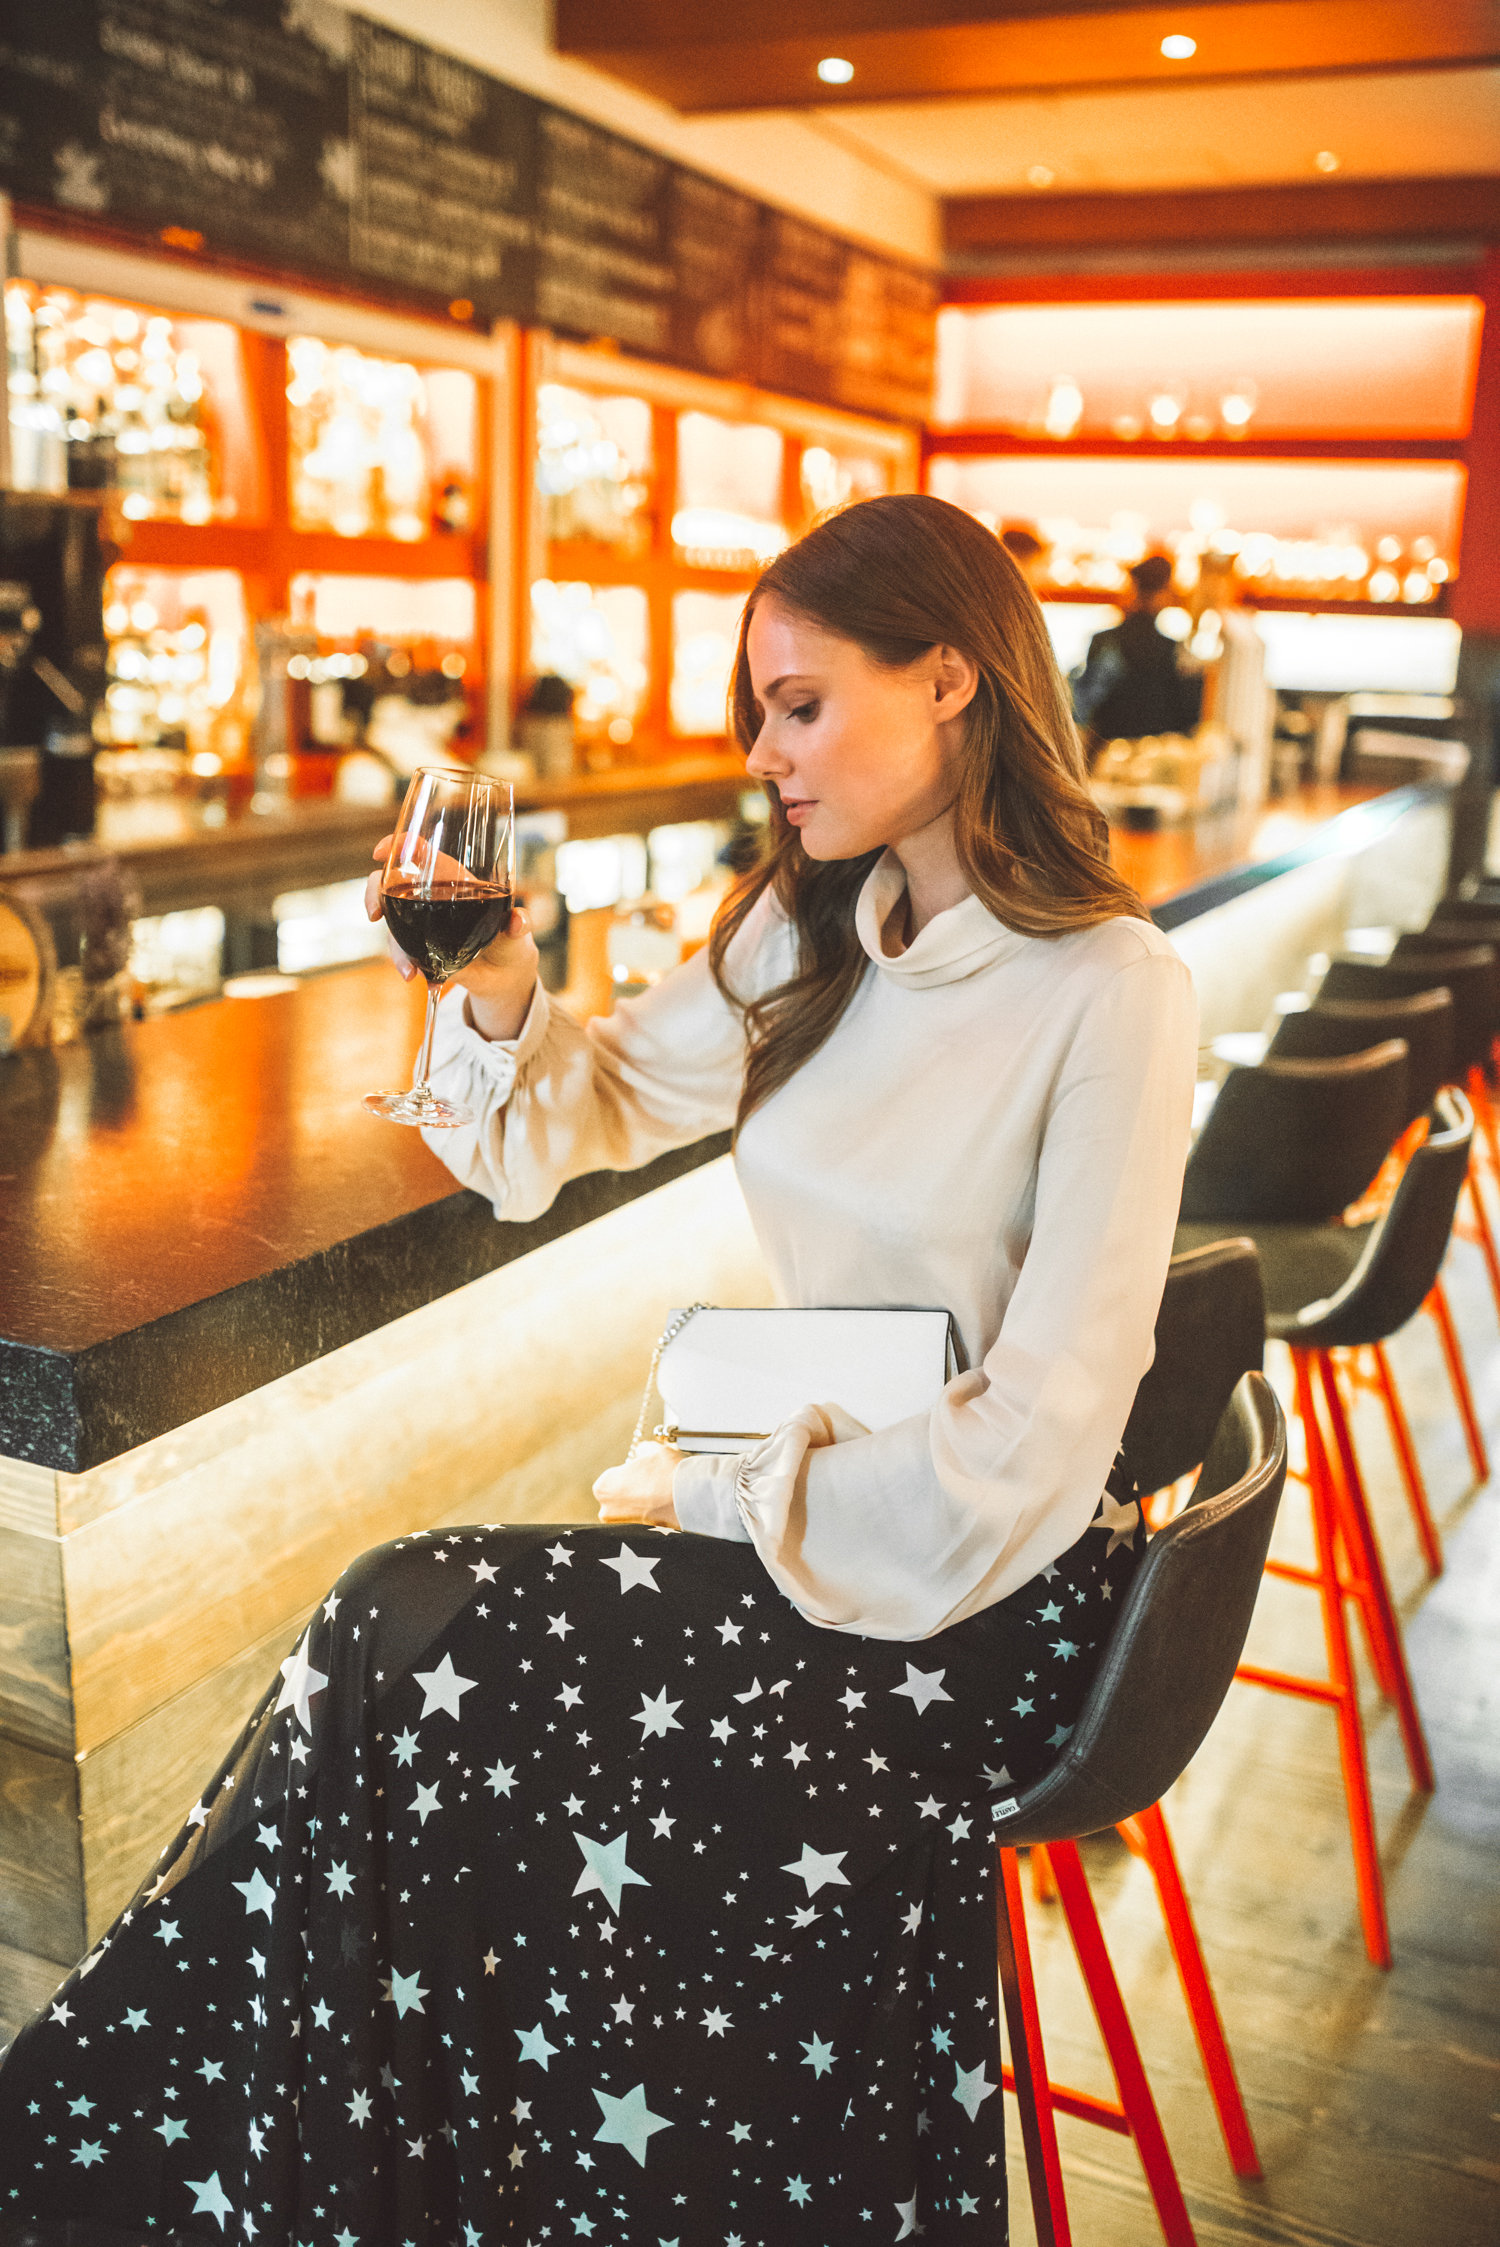 Alyssa Campanella of The A List shares her Whistler City Guide wearing LPA Top 340 and Lovers + Friends Hydra Skirt from Revolve at Cure Bar at Nita Lake Lodge